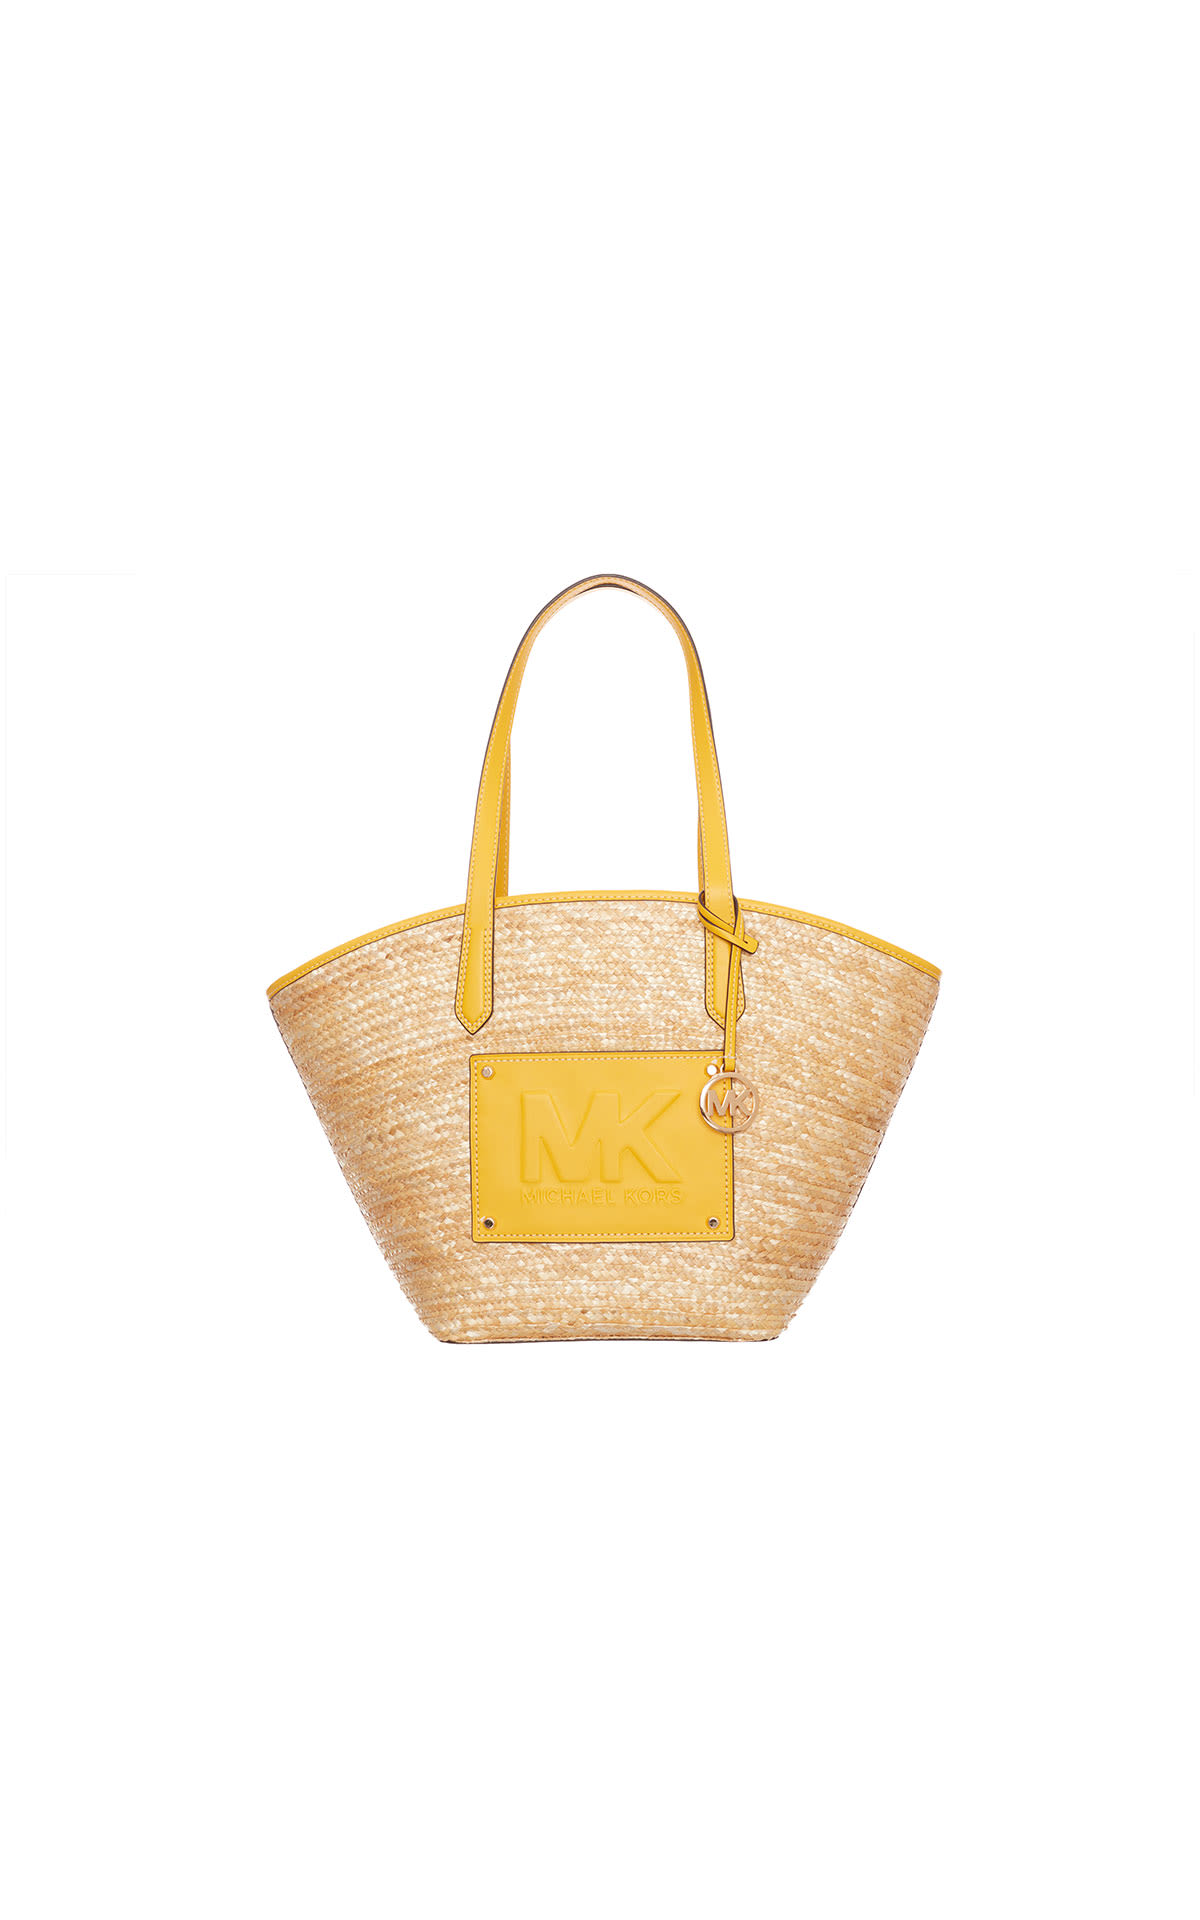 Michael Kors Large tote from Bicester Village